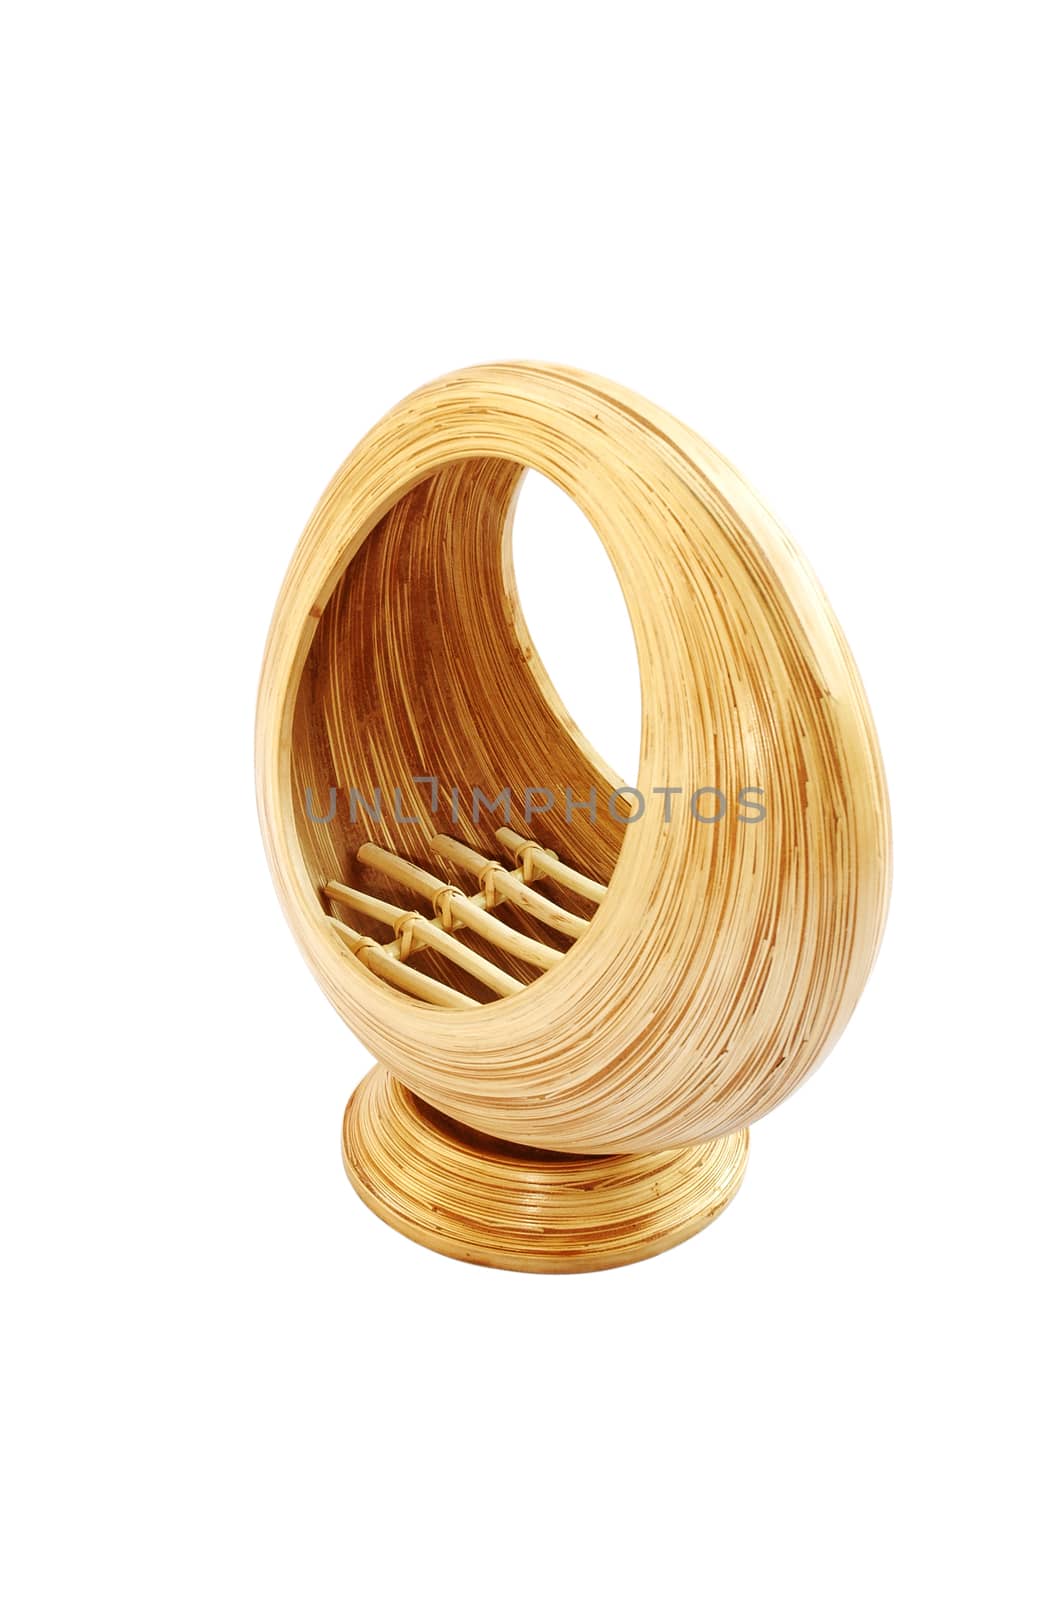 Bamboo basket isolated o by NuwatPhoto